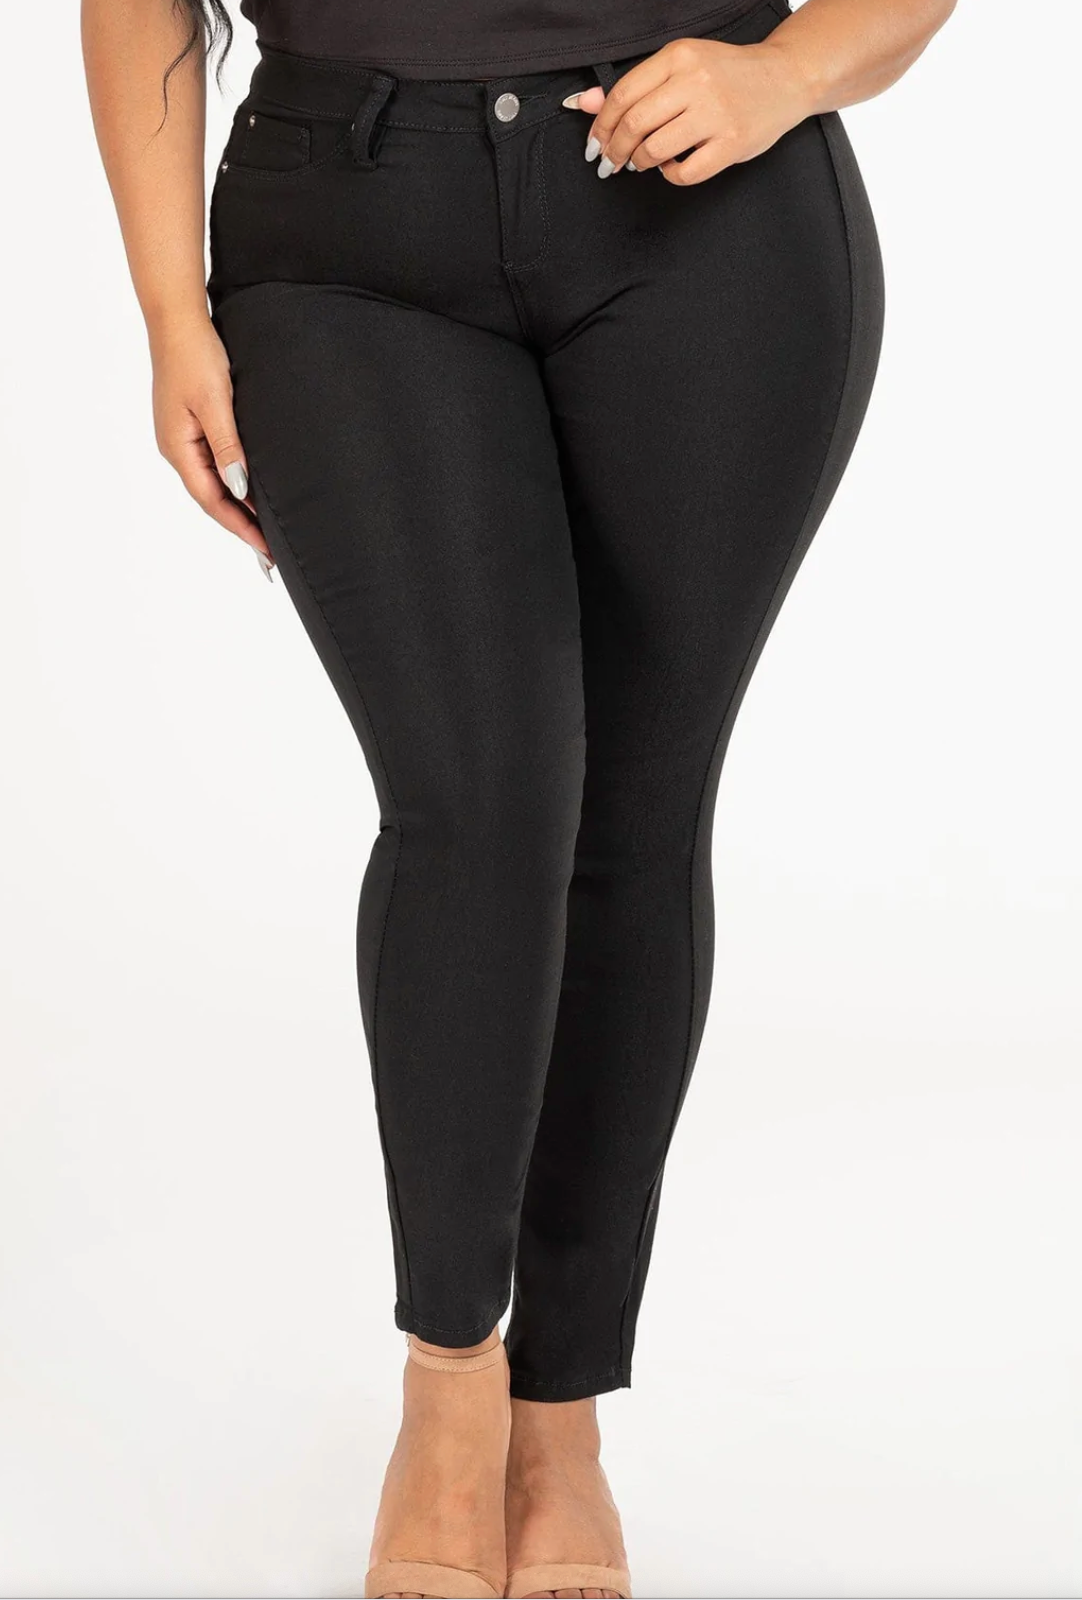 Plus Size Hyperstretch Mid-Rise Skinny Jean